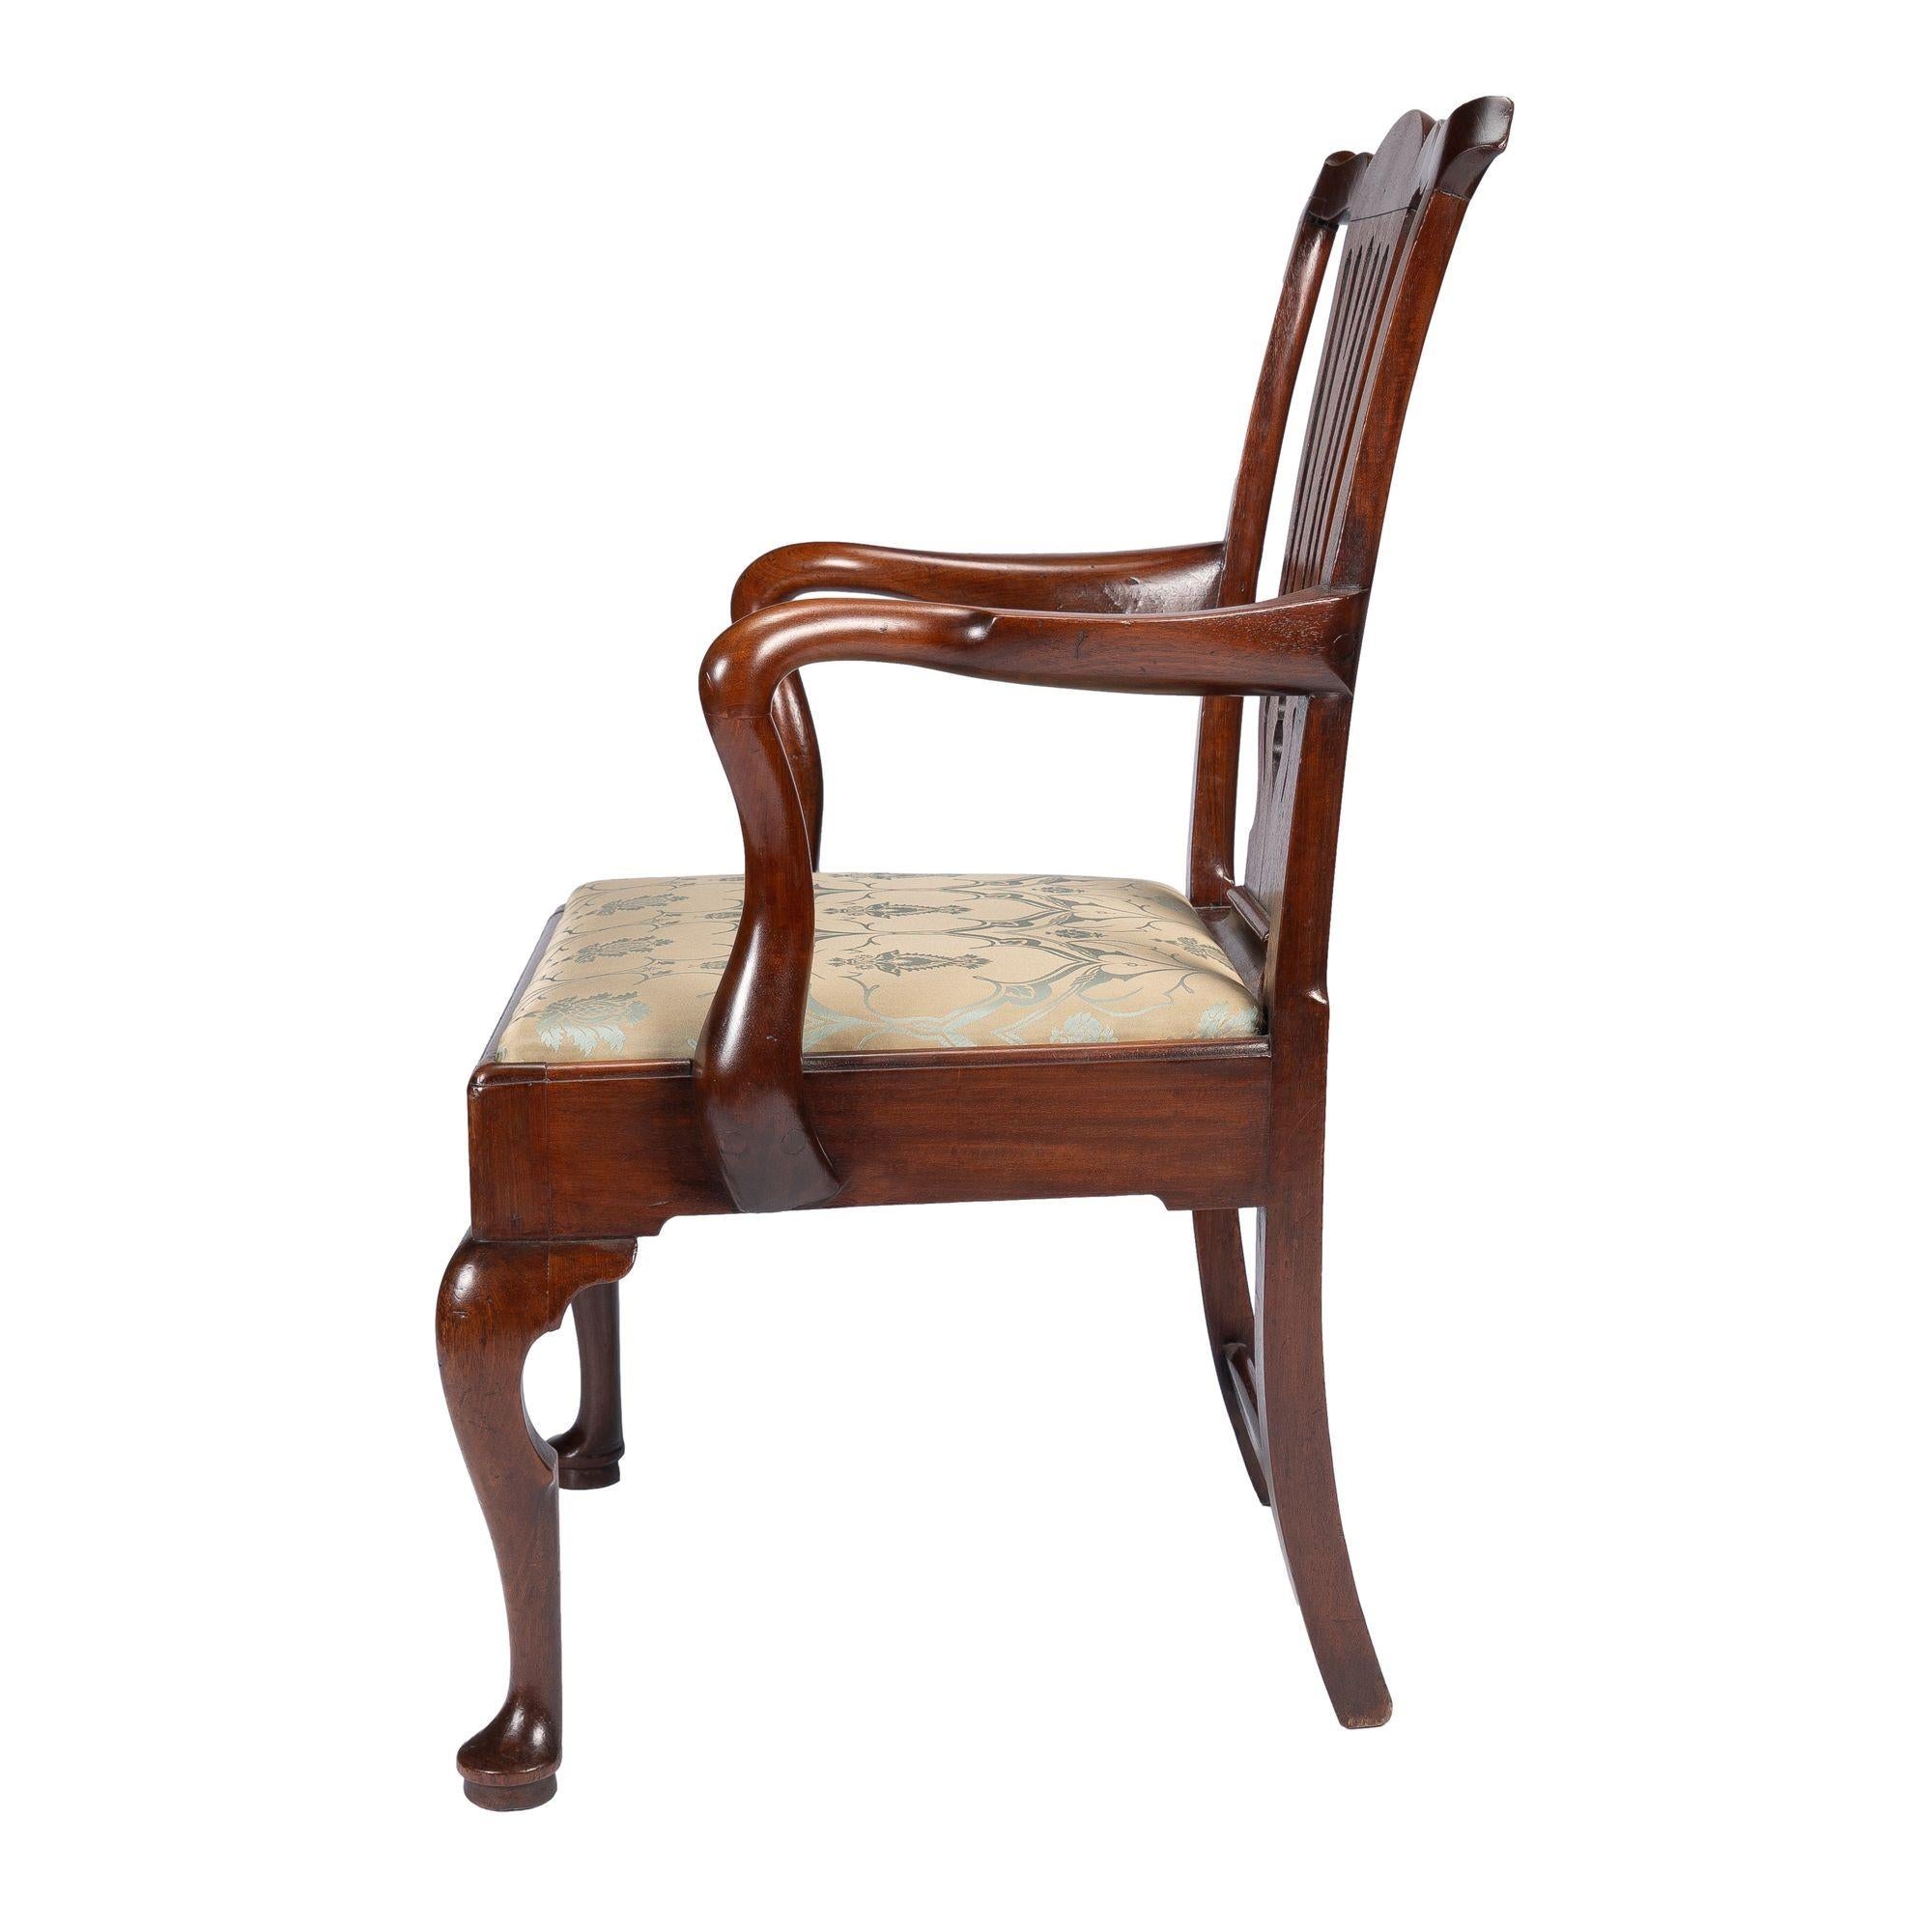 English George II Walnut Armchair with Upholstered Slip Seat, c. 1740 In Good Condition For Sale In Kenilworth, IL